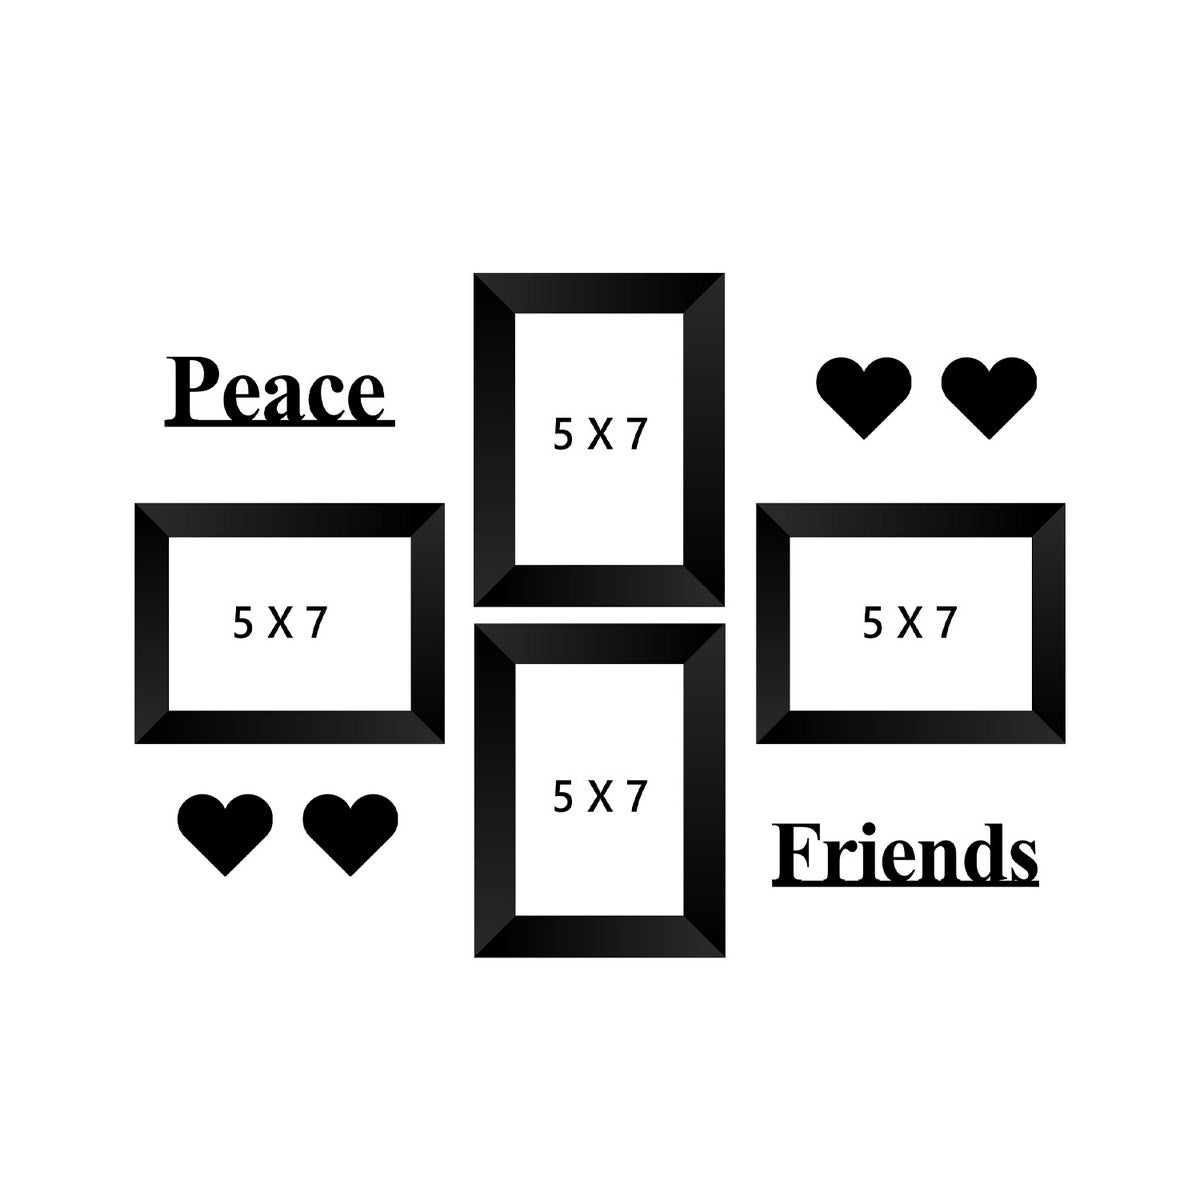 Memory Wall Collage Photo Frame - Set of 4 Photo Frames for 4 Photos of 5"x7", 1 Piece of PEACE, 1 Piece of FRIENDS, 4 Pieces of HEARTS 3